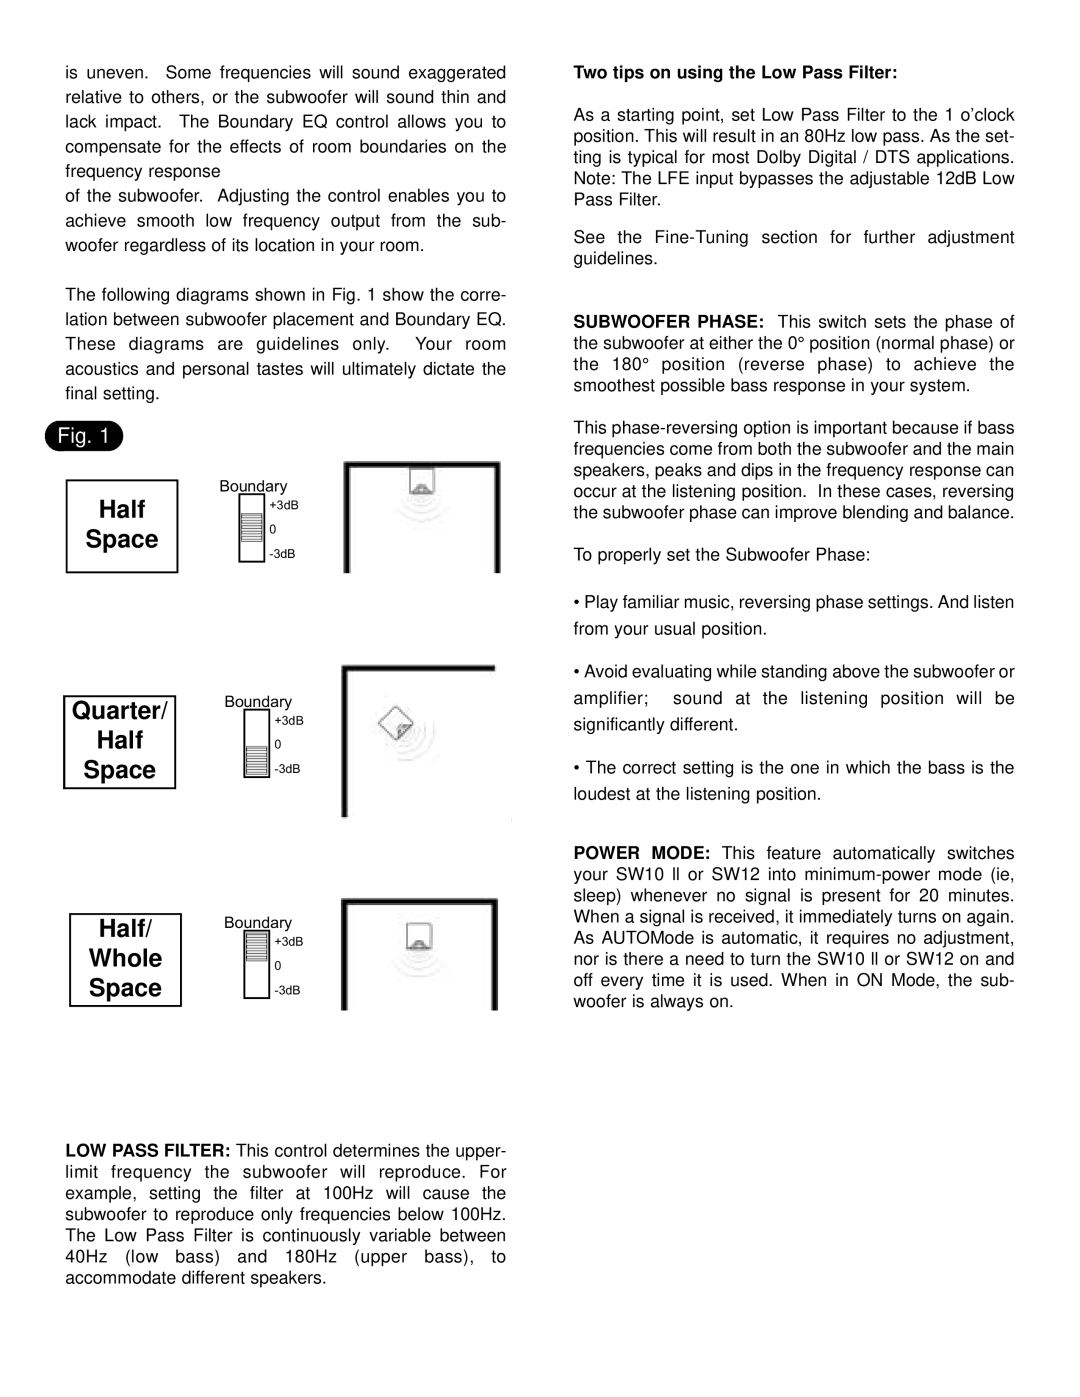 NHT SW10, SW12 user manual Half Space Quarter Half Space Half Whole Space, Two tips on using the Low Pass Filter 